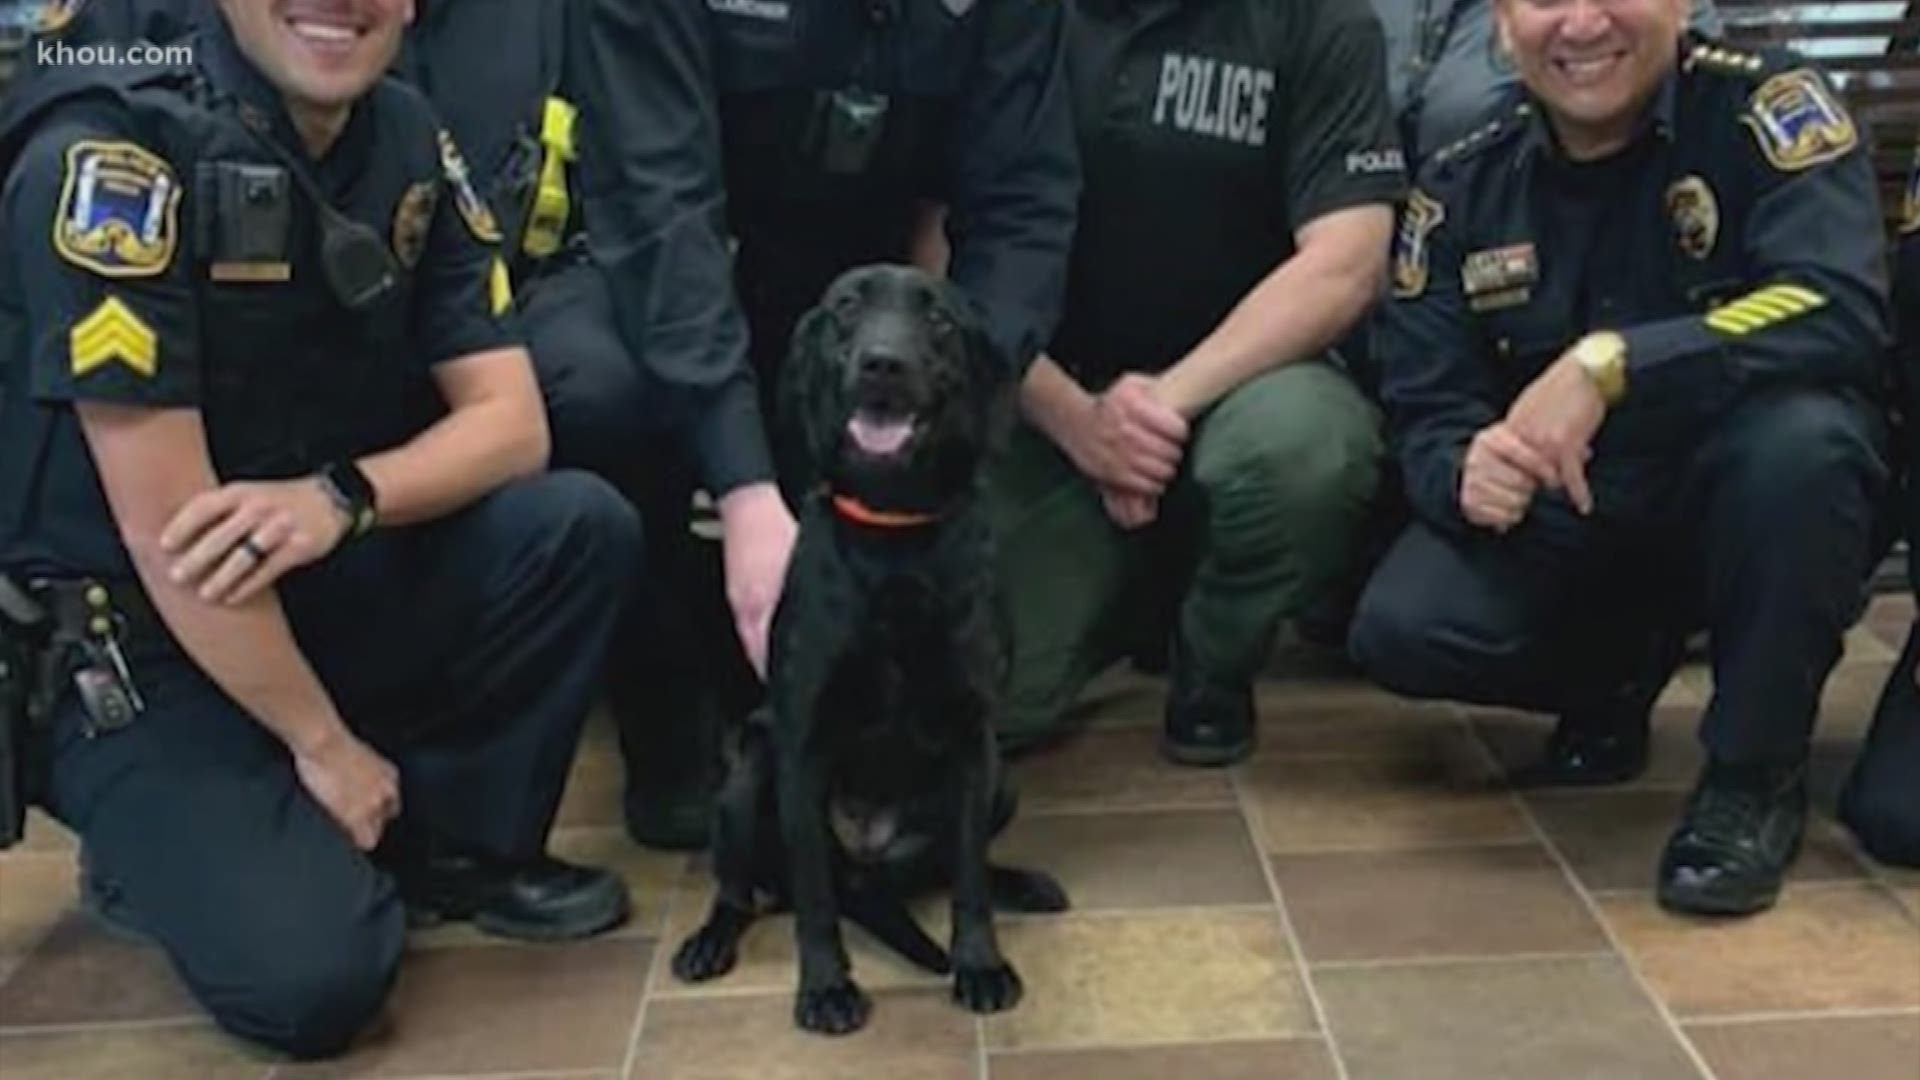 Freeport Police Department has a new member of the team, and he is keeping the legacy of Officer Abigail Arias alive.